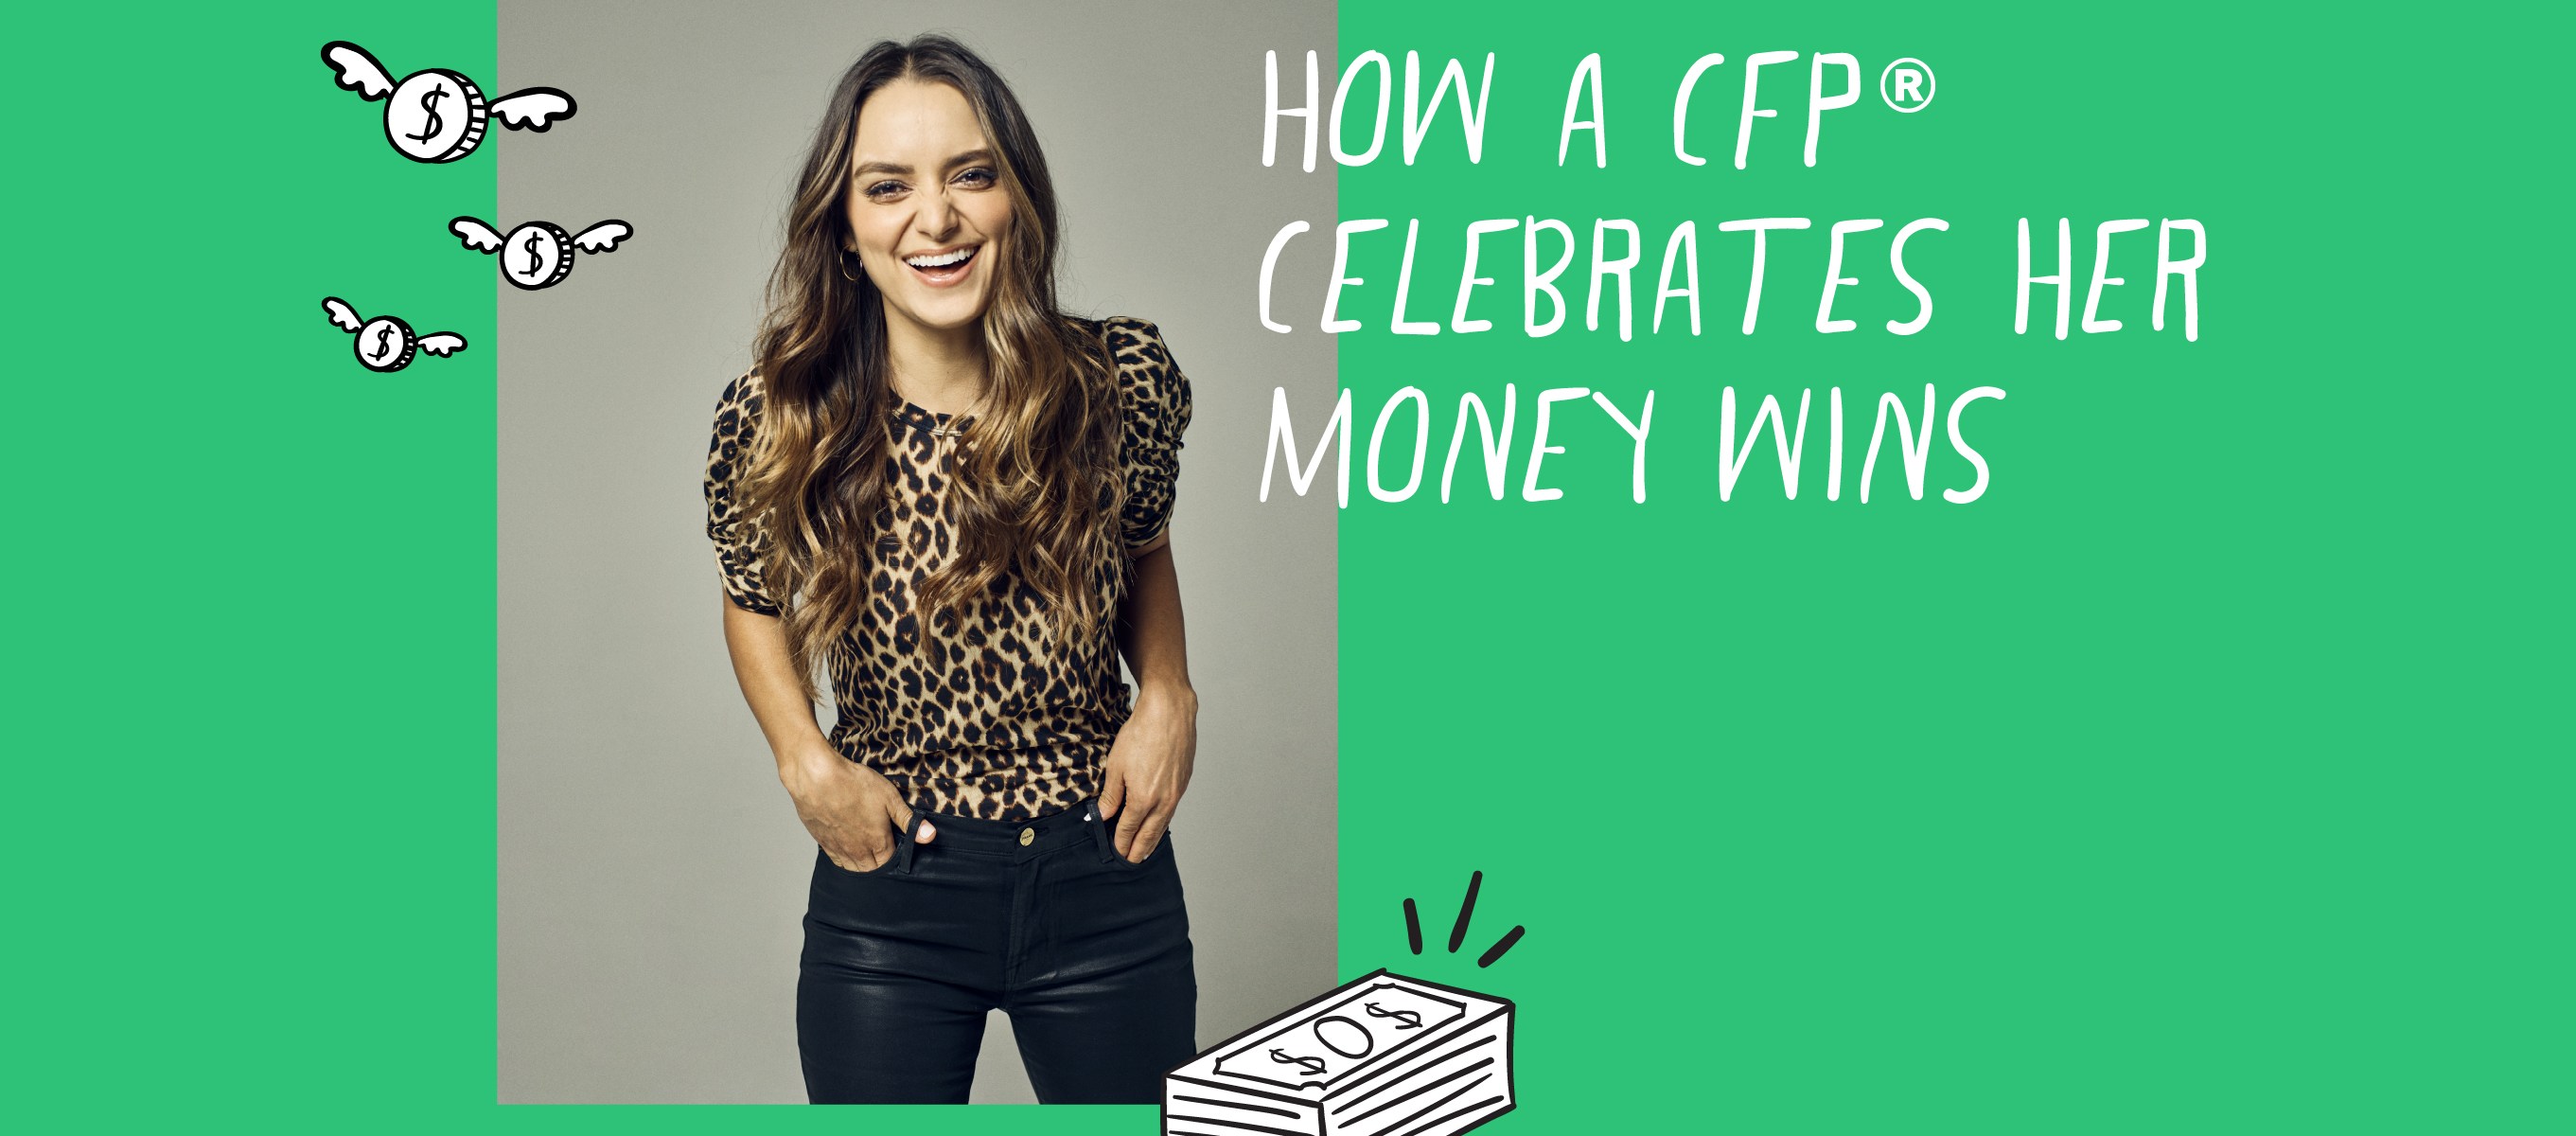 Brittney Castro, CFP Headshot with "How a CFP Celebrates her Money Wins" text